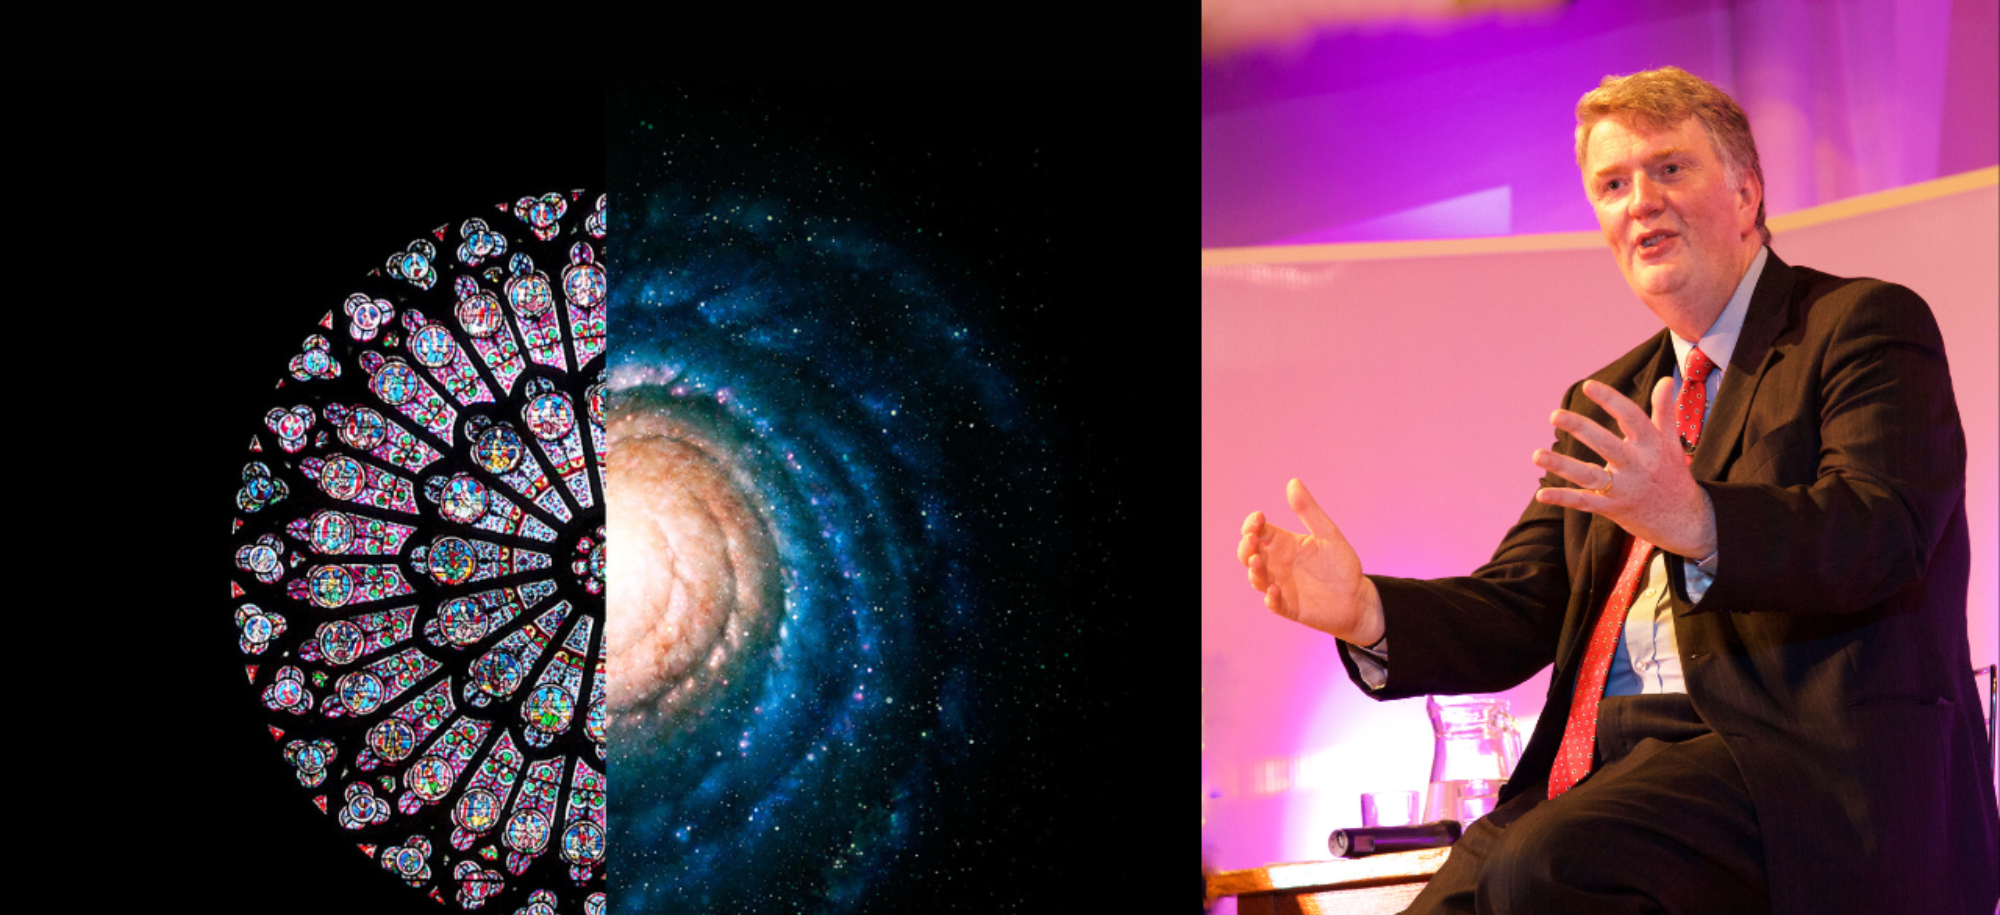 Collage showing Rev Professor David Wilkinson, an astronomy image and an image of a stained glass window